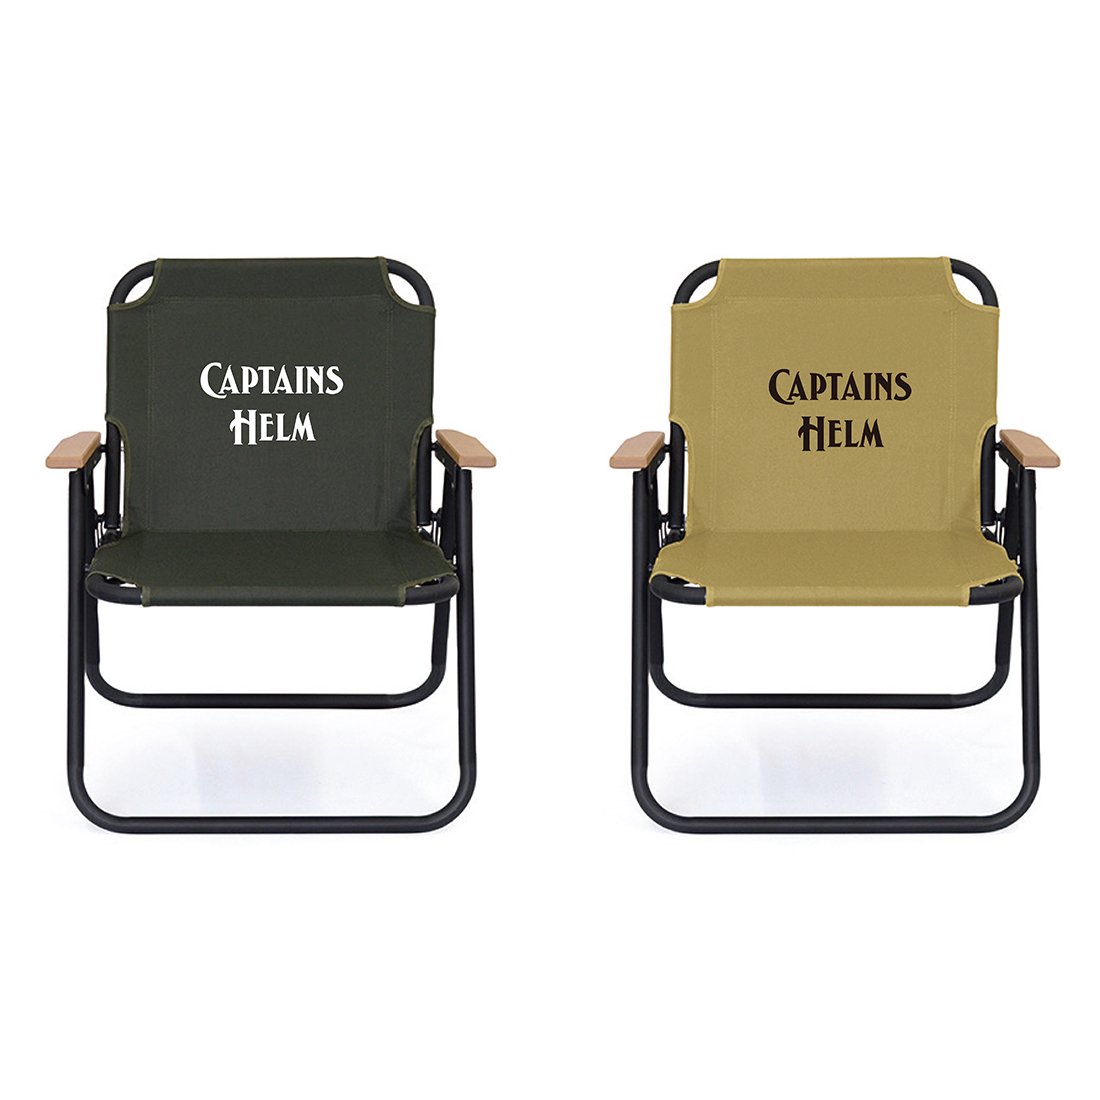 CAPTAINS HELM#CAMP CHAIR